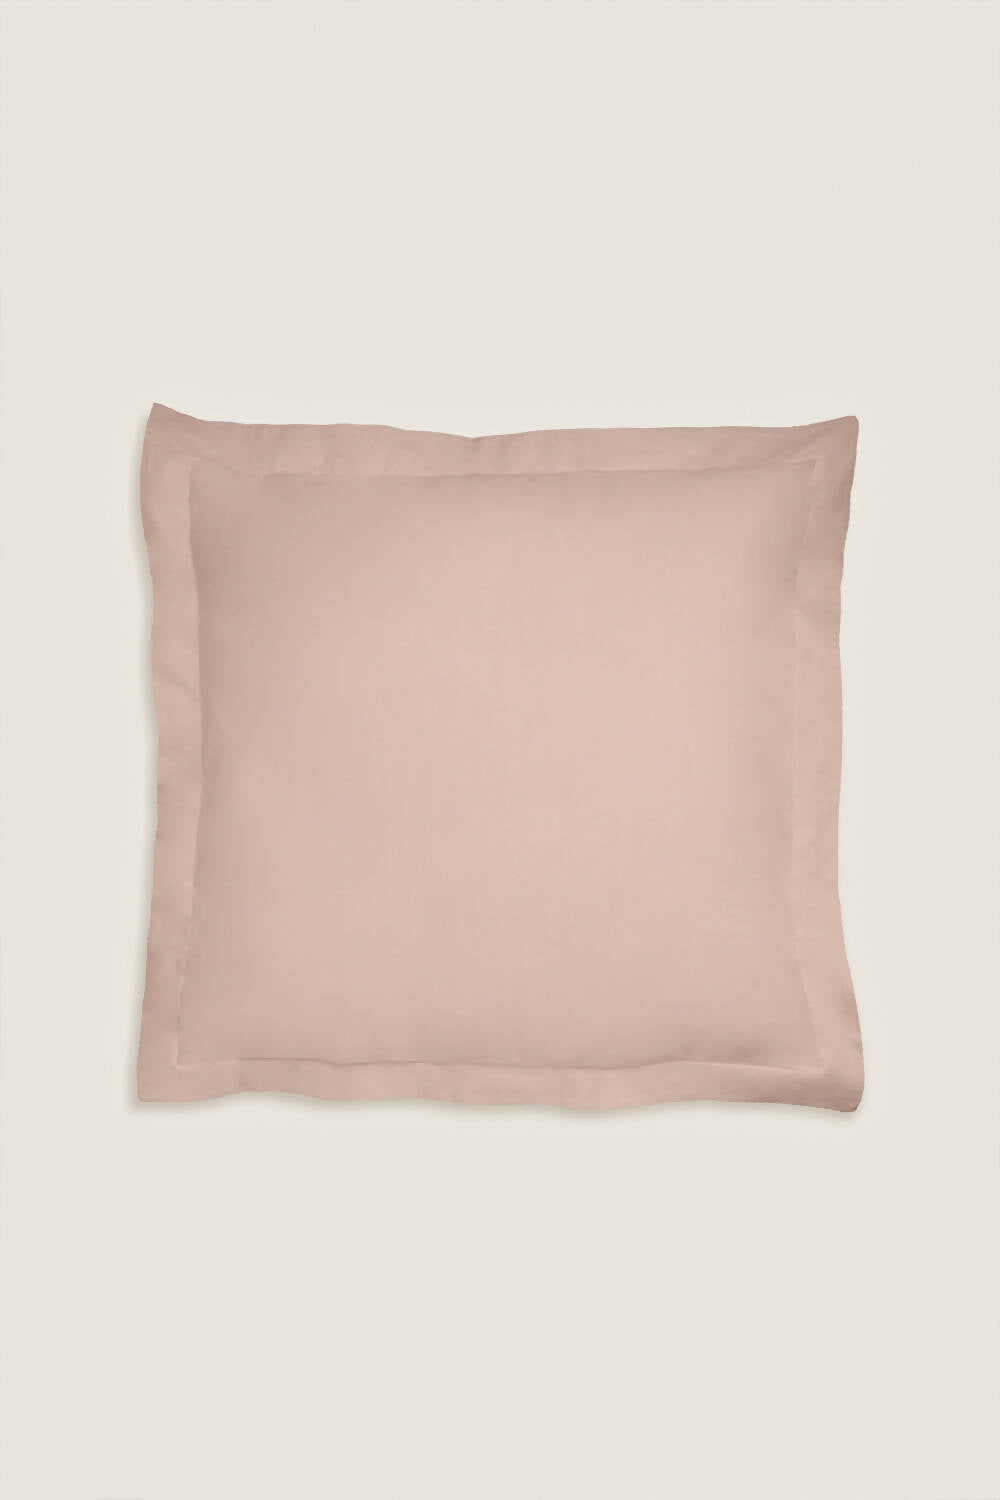 Cushion Cover - Dusty Pink (Set of 2)